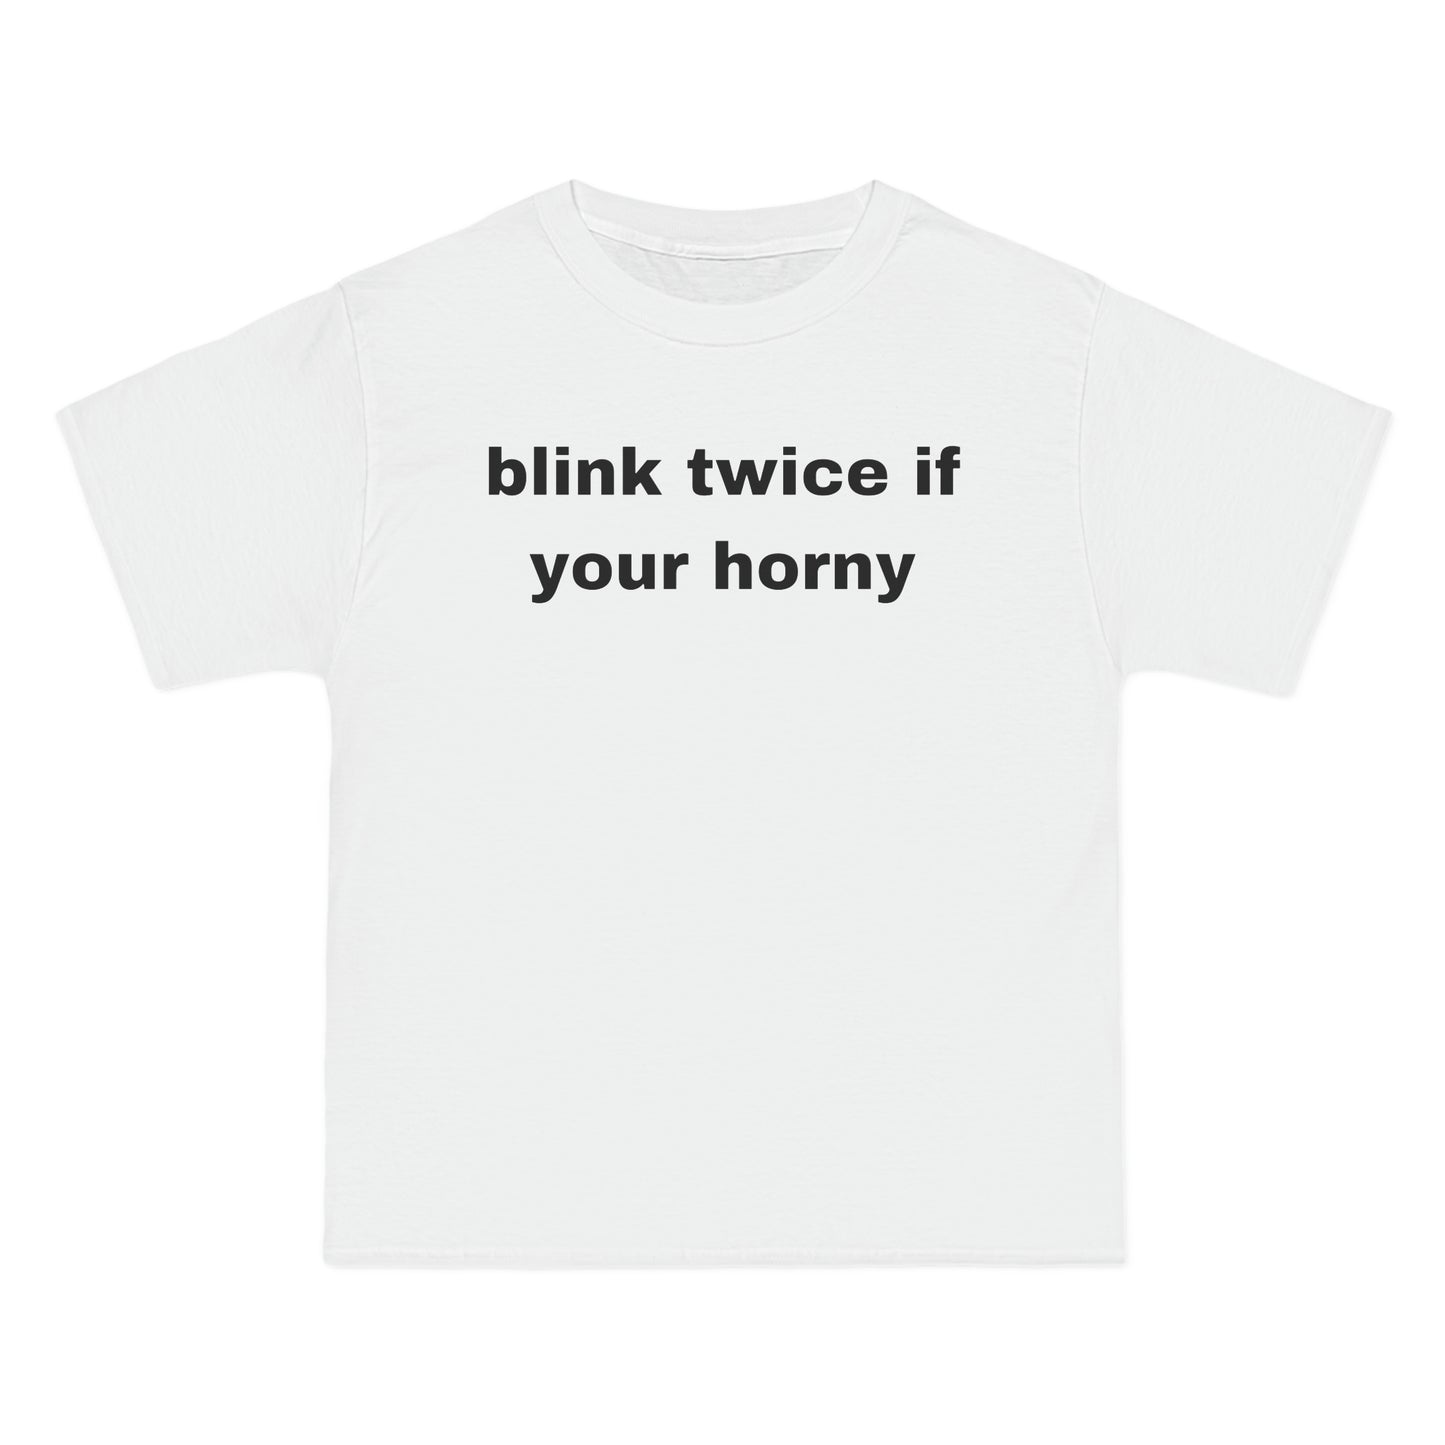 blink twice if your horny Tee